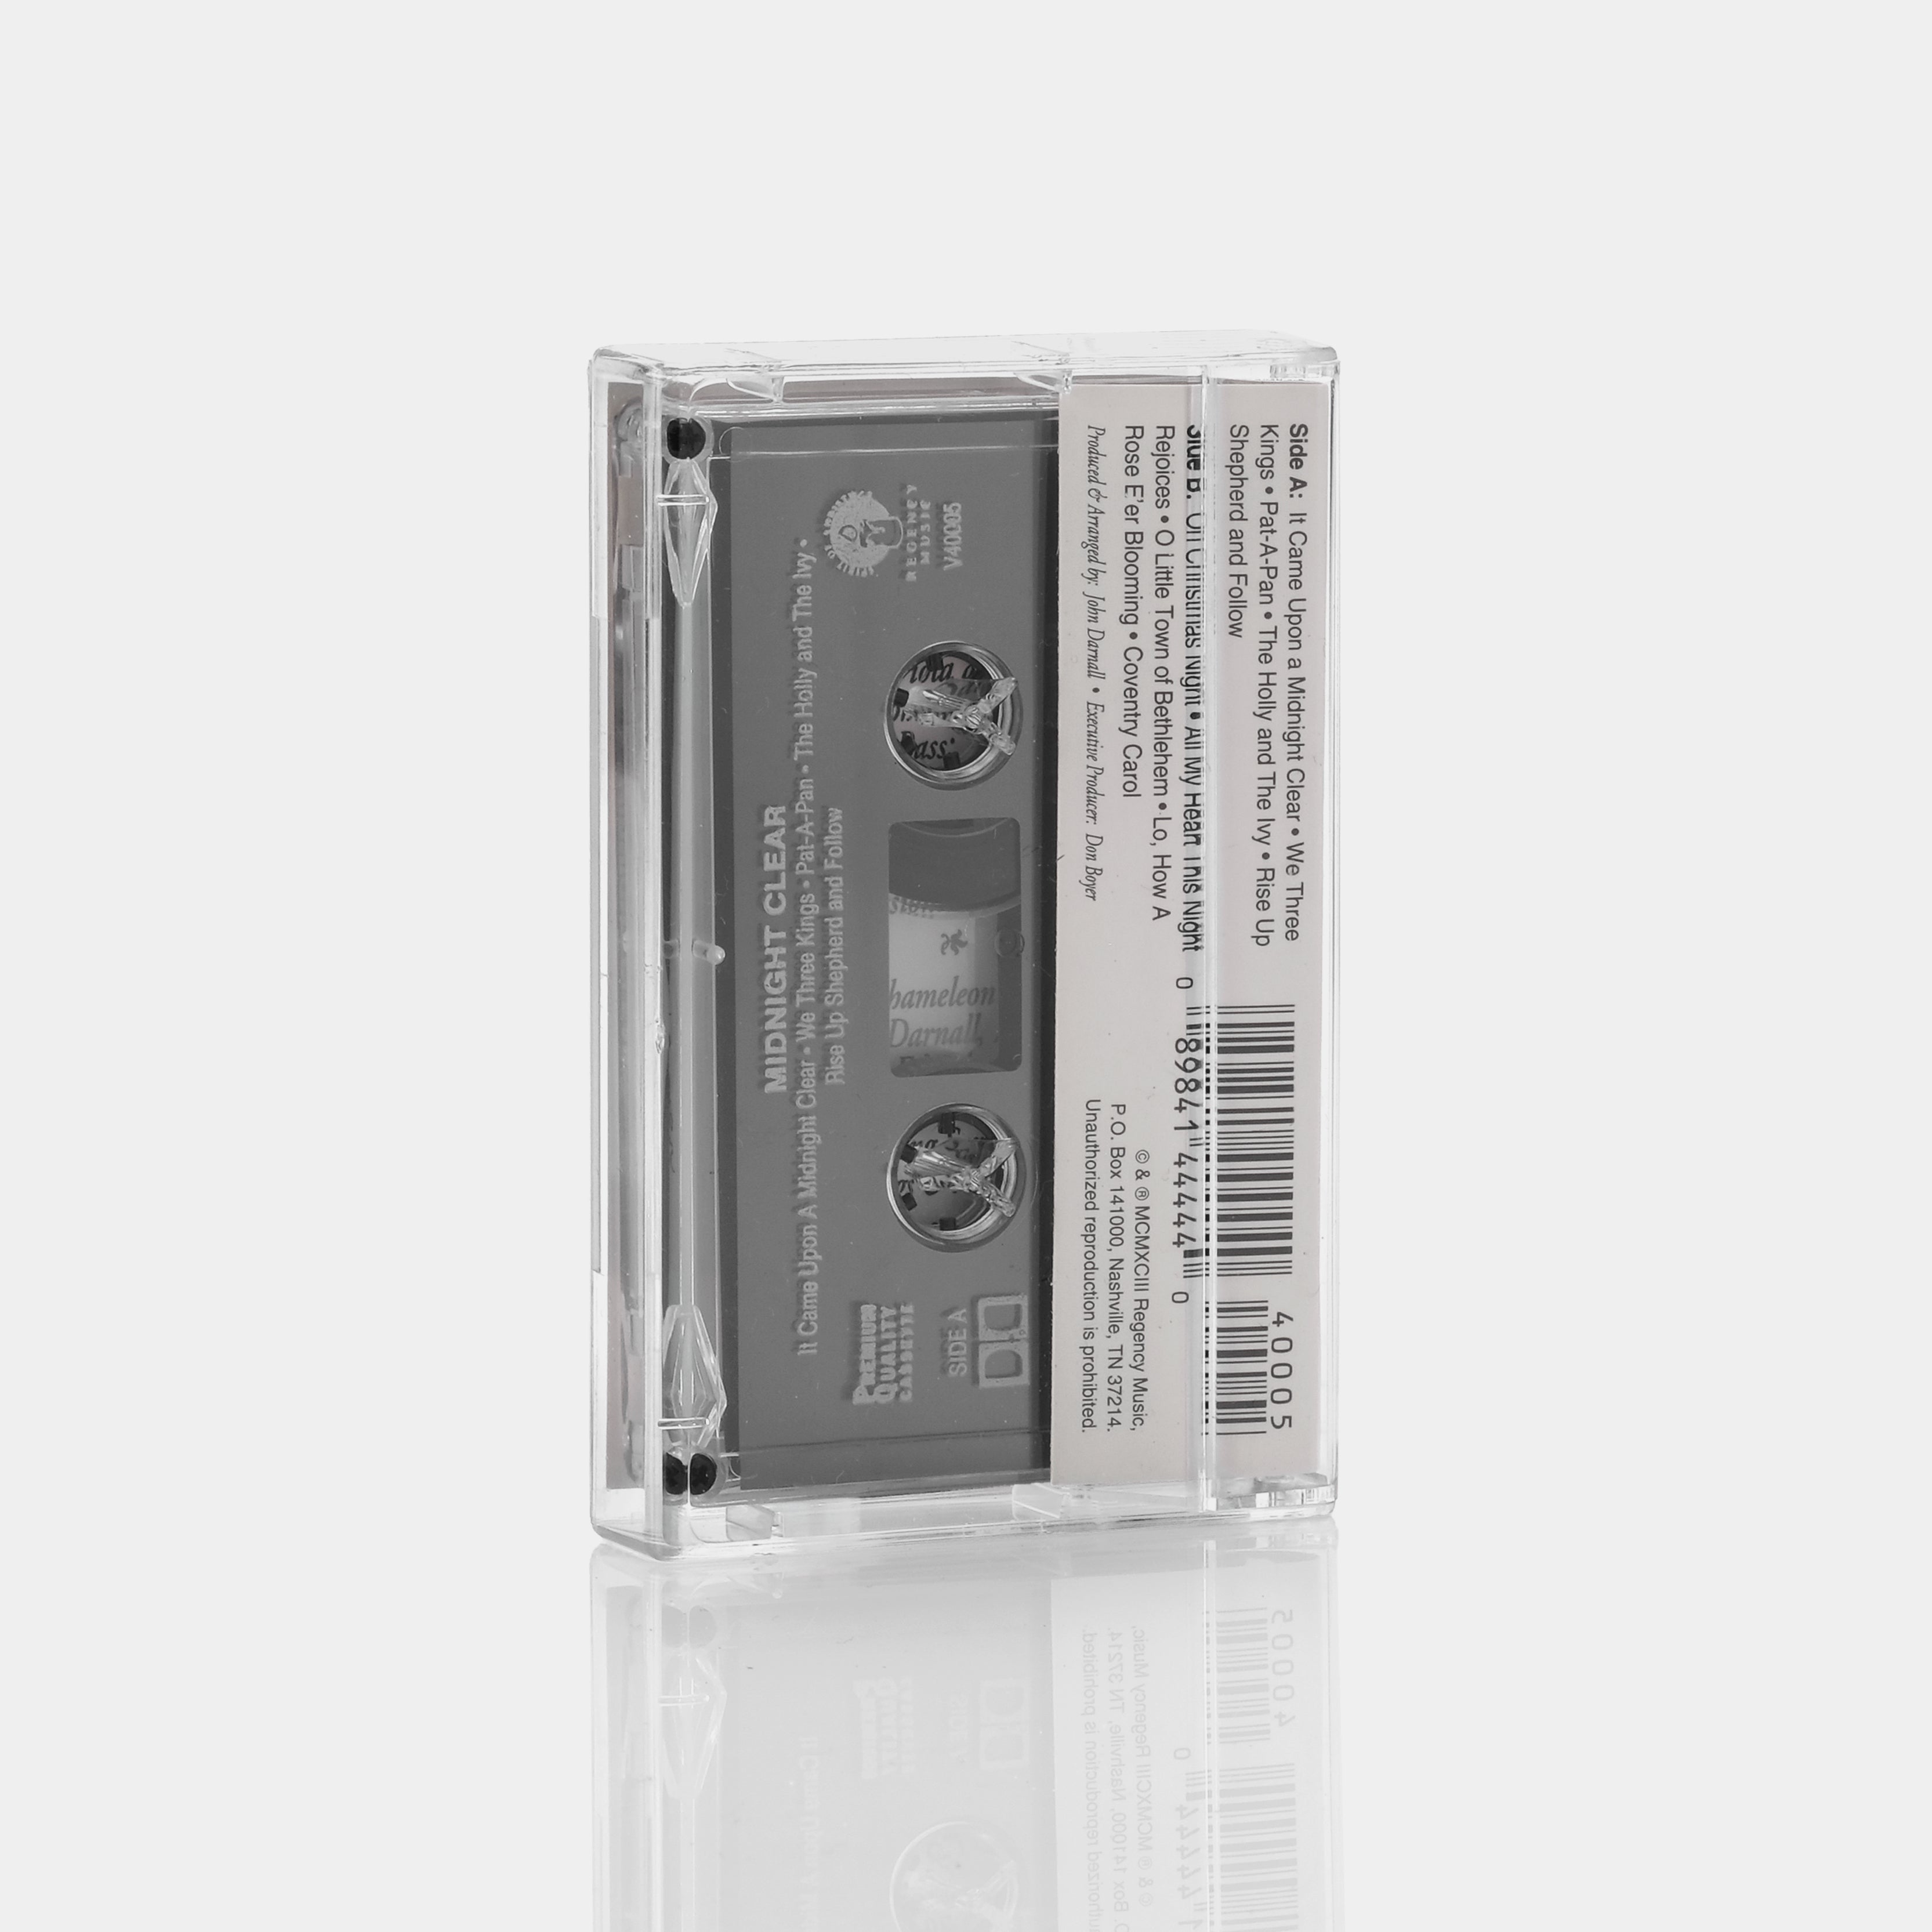 Midnight Clear (An Intimate Acoustic Christmas With Guitars & Other Instruments) Cassette Tape